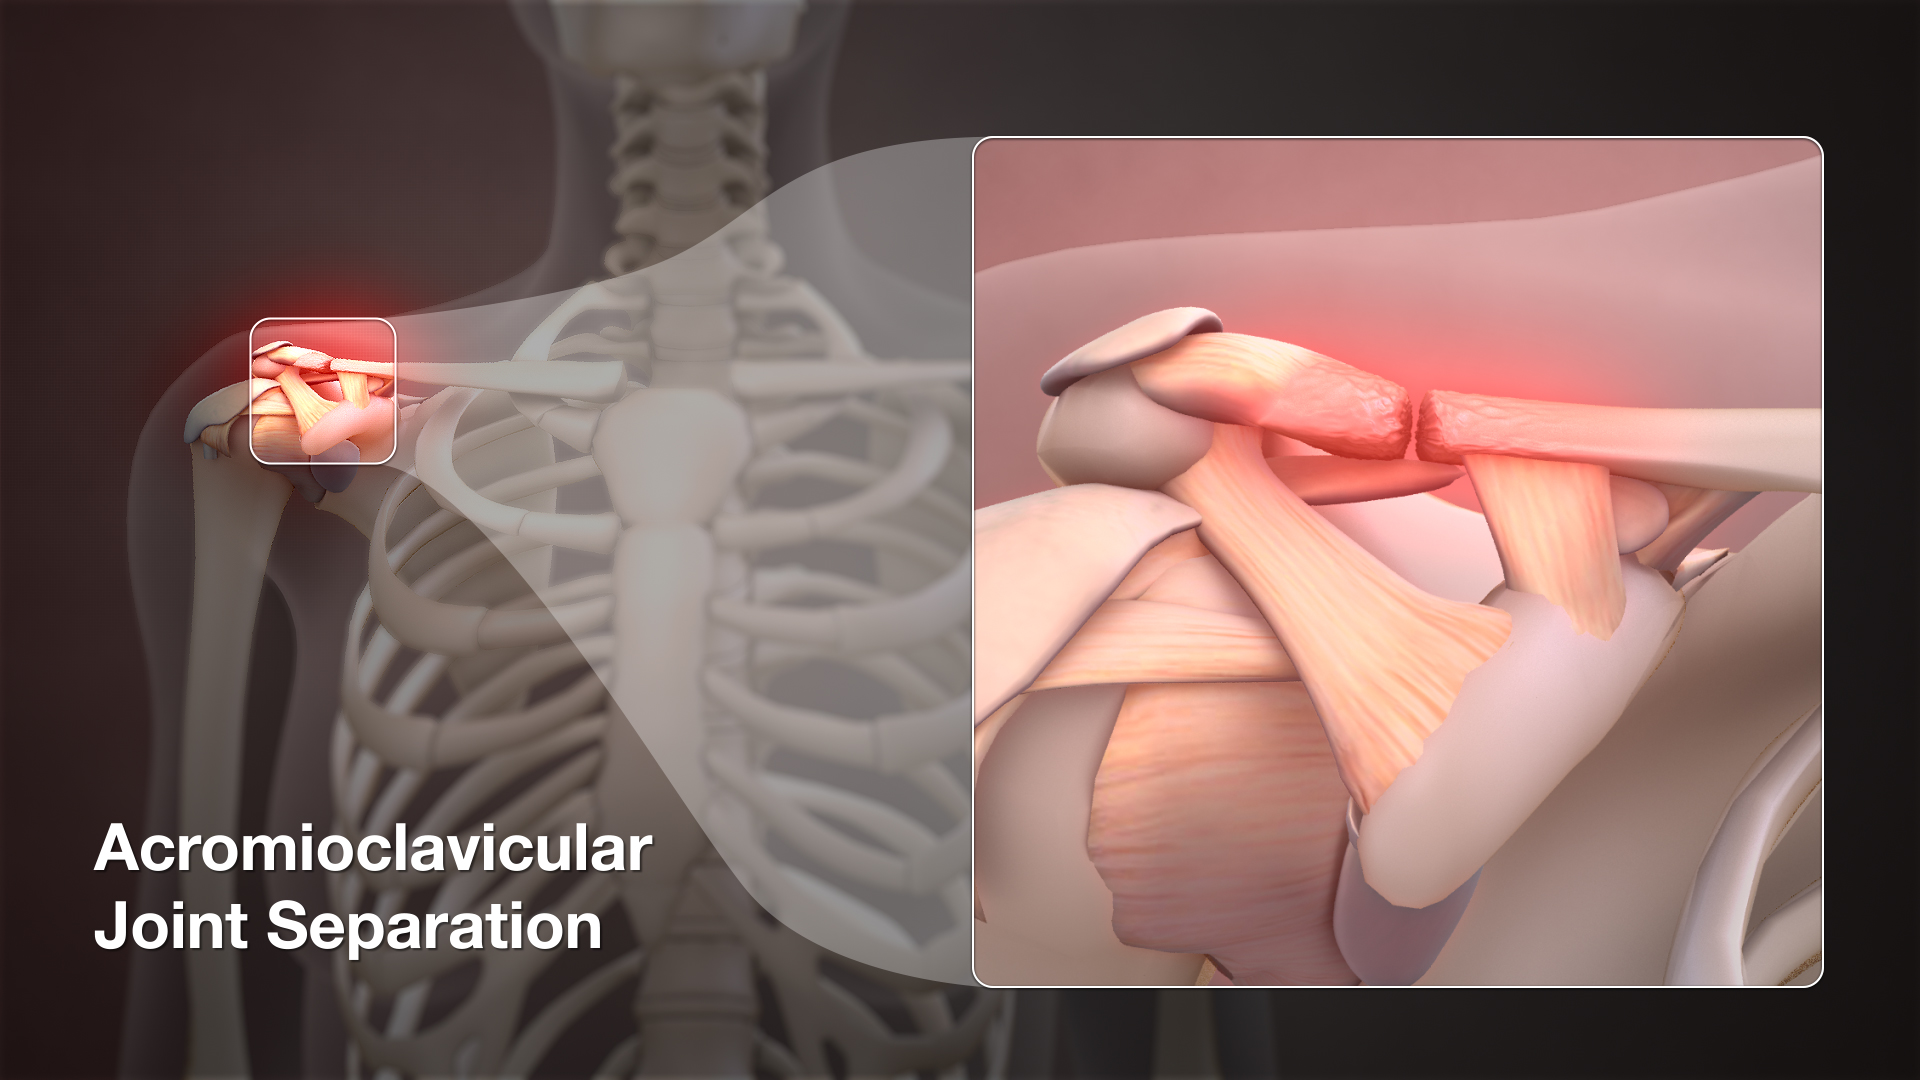 Acromioclavicular Joint Separation shown using Medical Animation